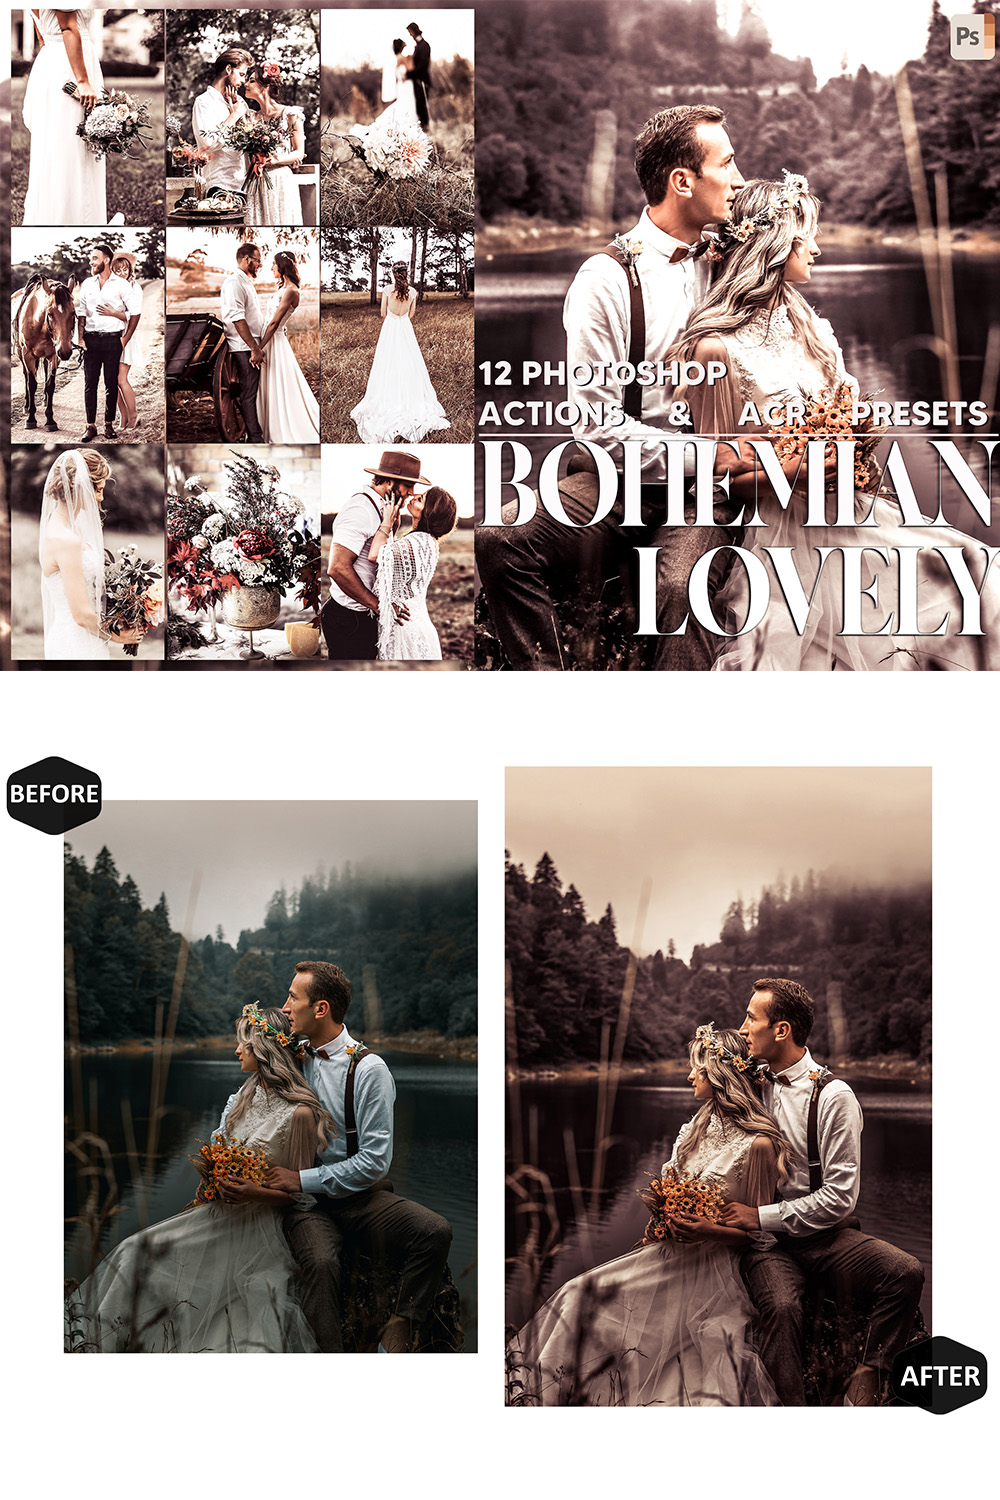 12 Photoshop Actions, Bohemian Lovely Ps Action, Bright ACR Preset, Cool Dark Ps Filter, Boho Pictures And style Theme For Instagram, Blogger pinterest preview image.